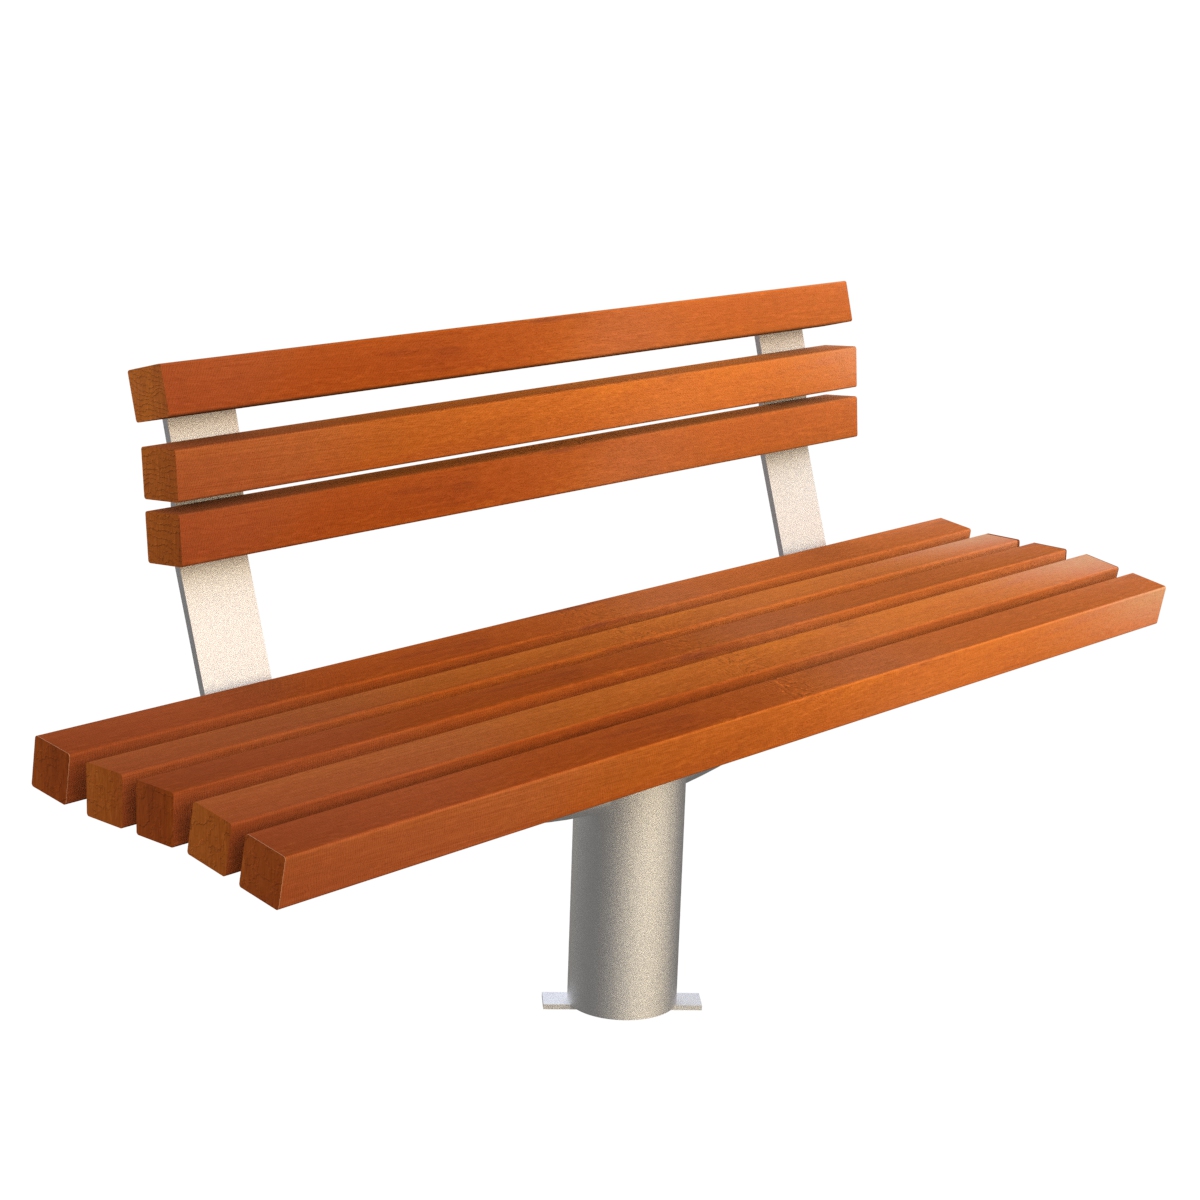 Diana Wood Bench Urban Furniture To Sit Down In Parks And Gardens